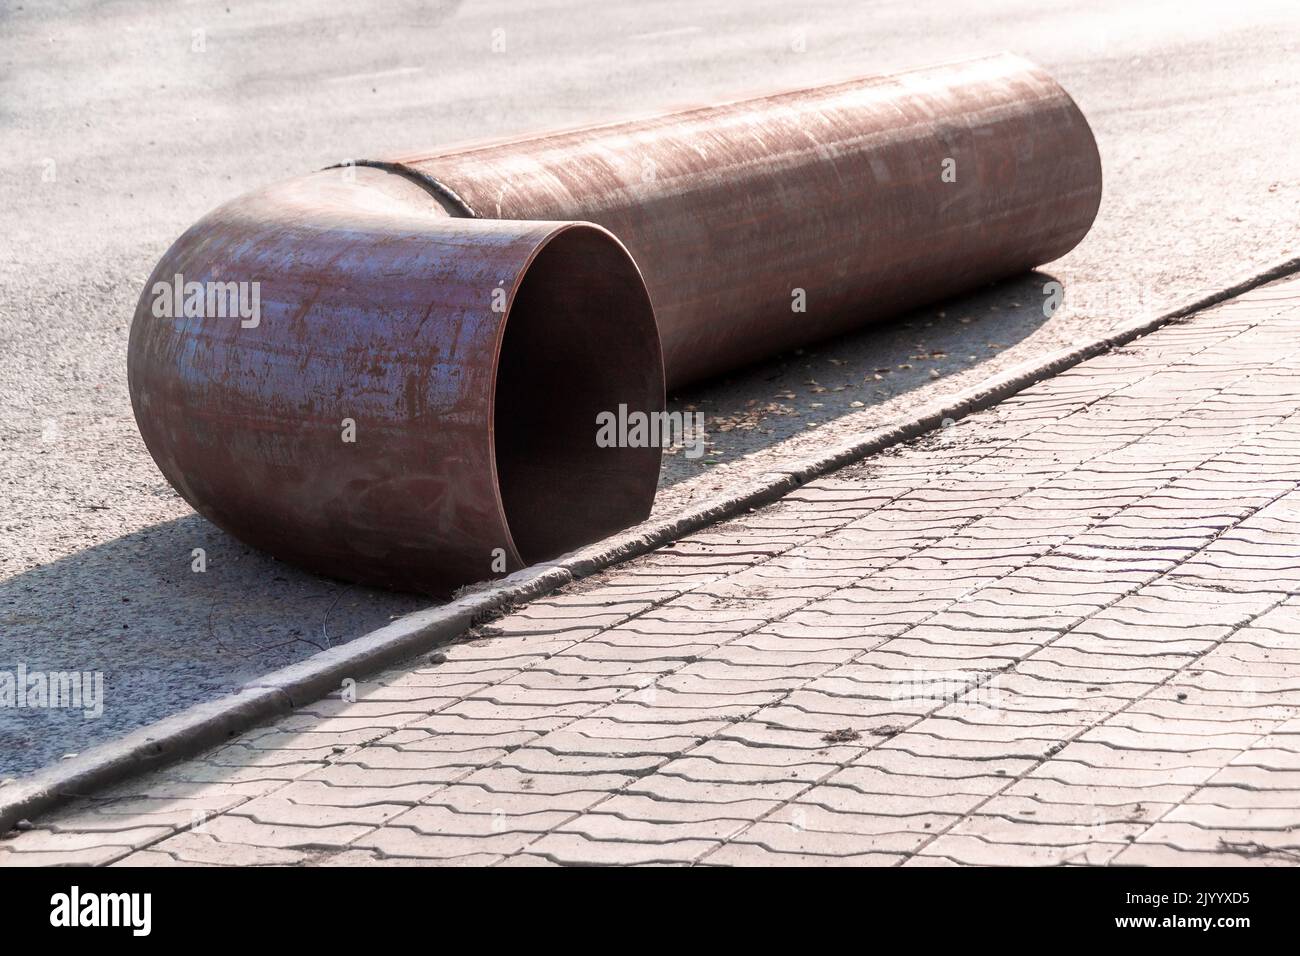 a new fitting pipe turn lies on the pavement waiting for the repair of the main pipe, backlight and selective focus Stock Photo